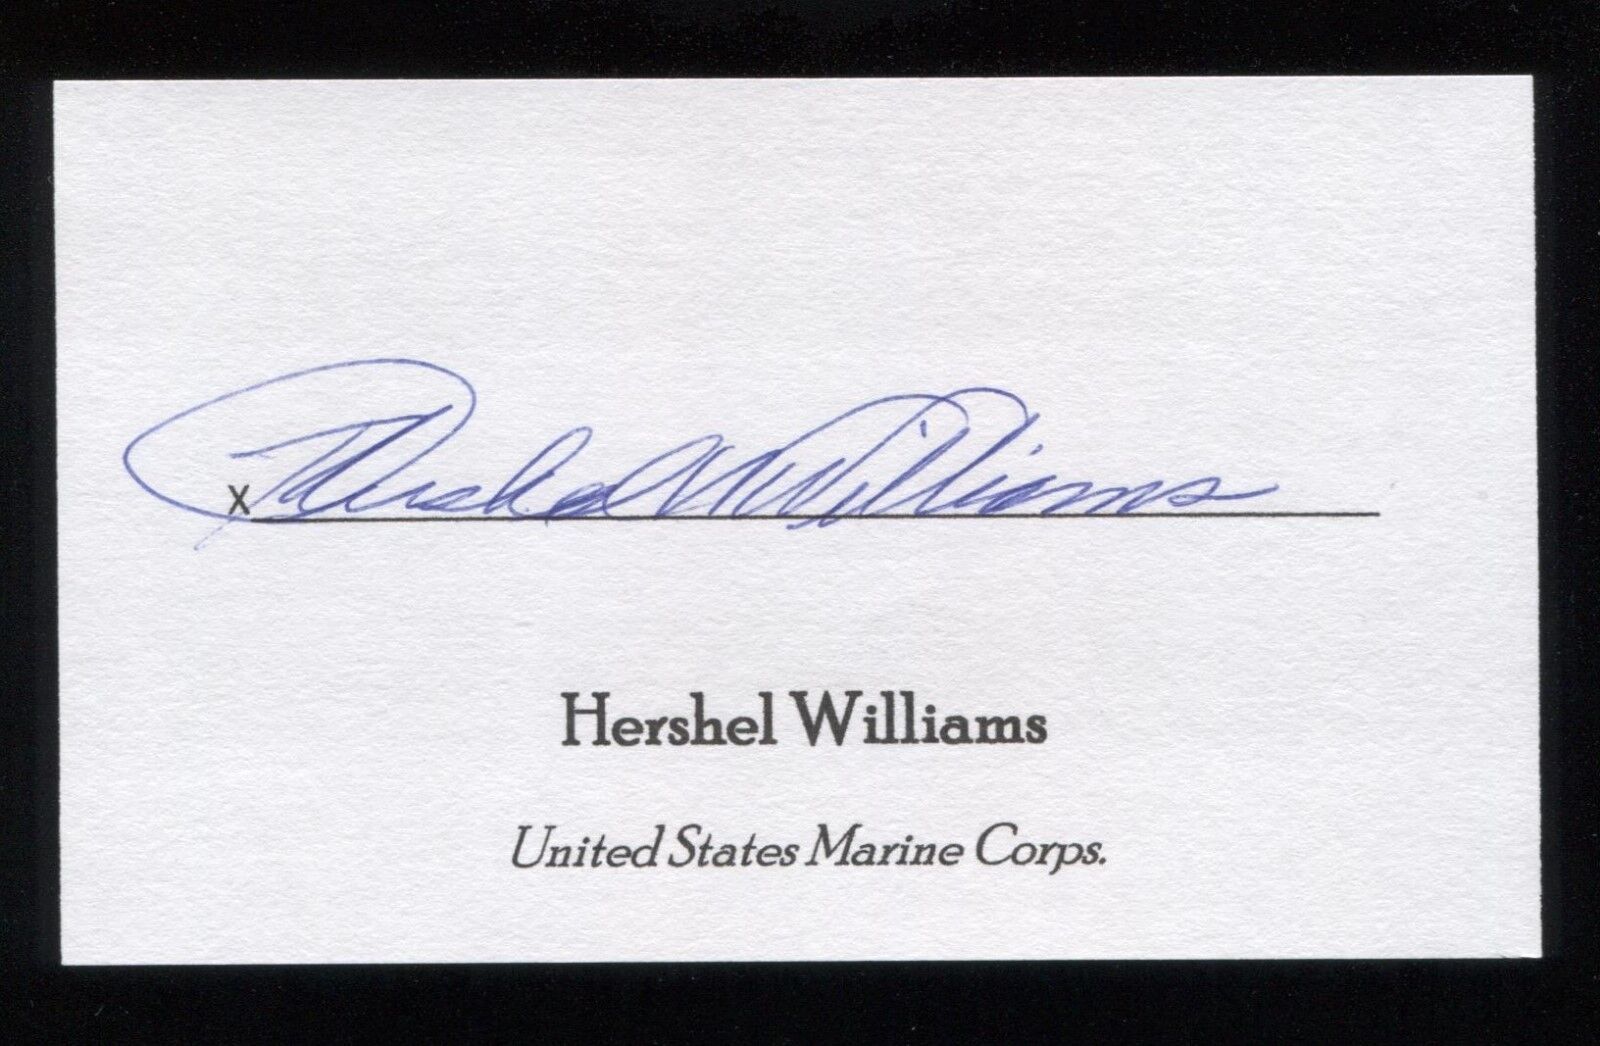 Hershel Williams Signed 3x5 Index Card Signature Autographed Medal of Honor WWII